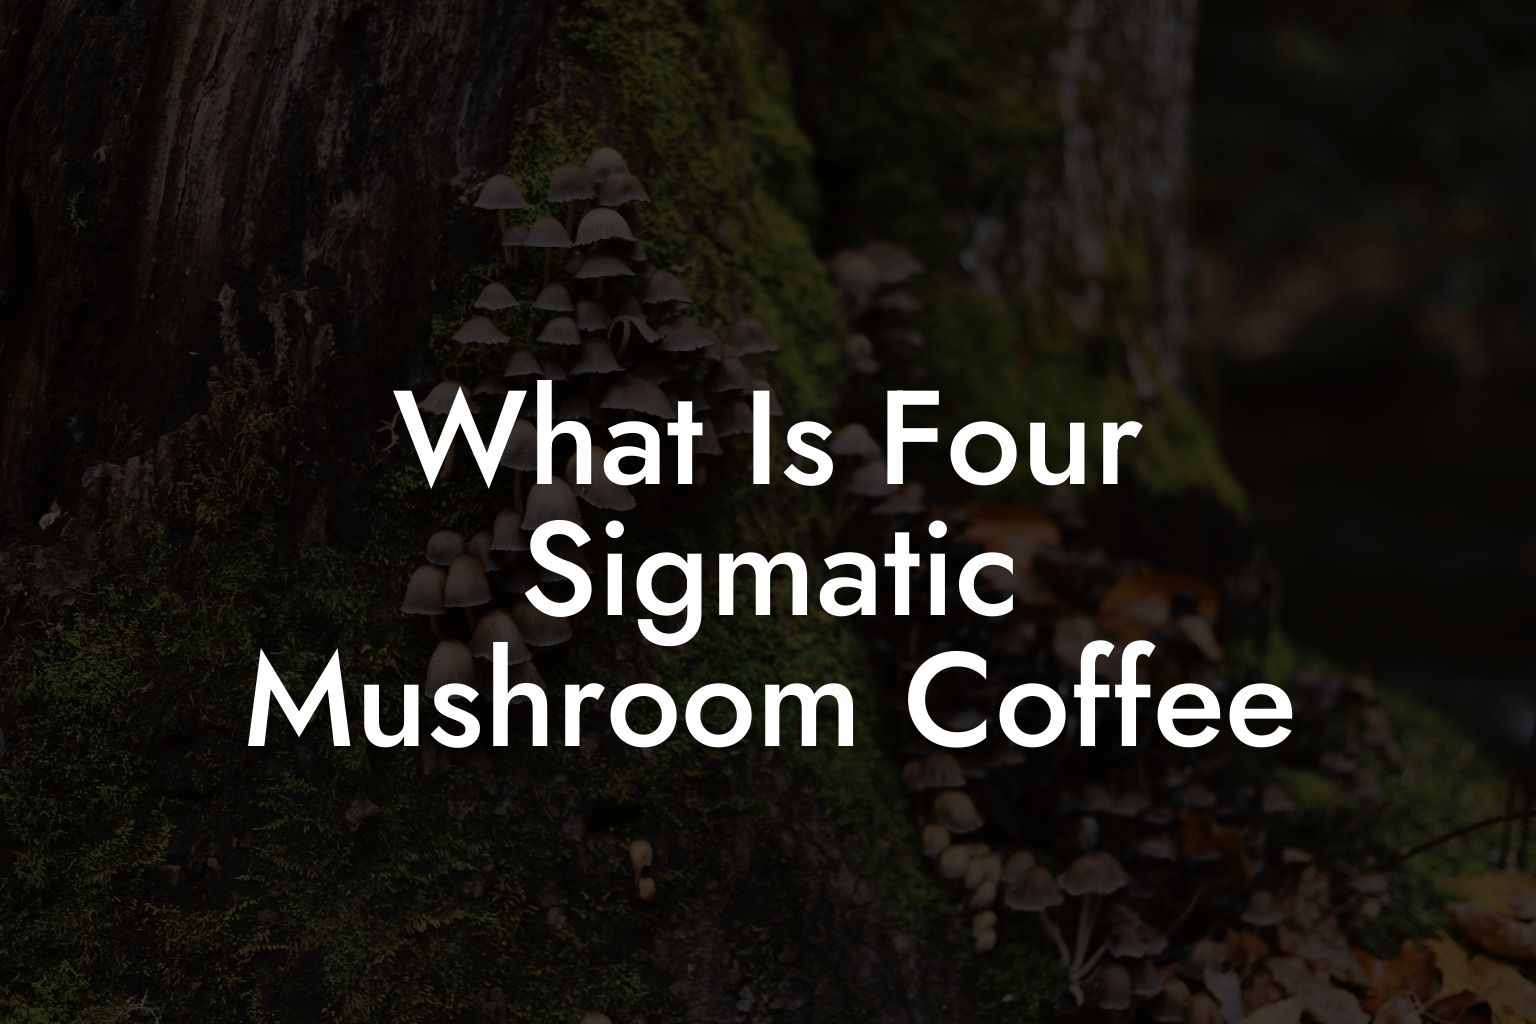 What Is Four Sigmatic Mushroom Coffee